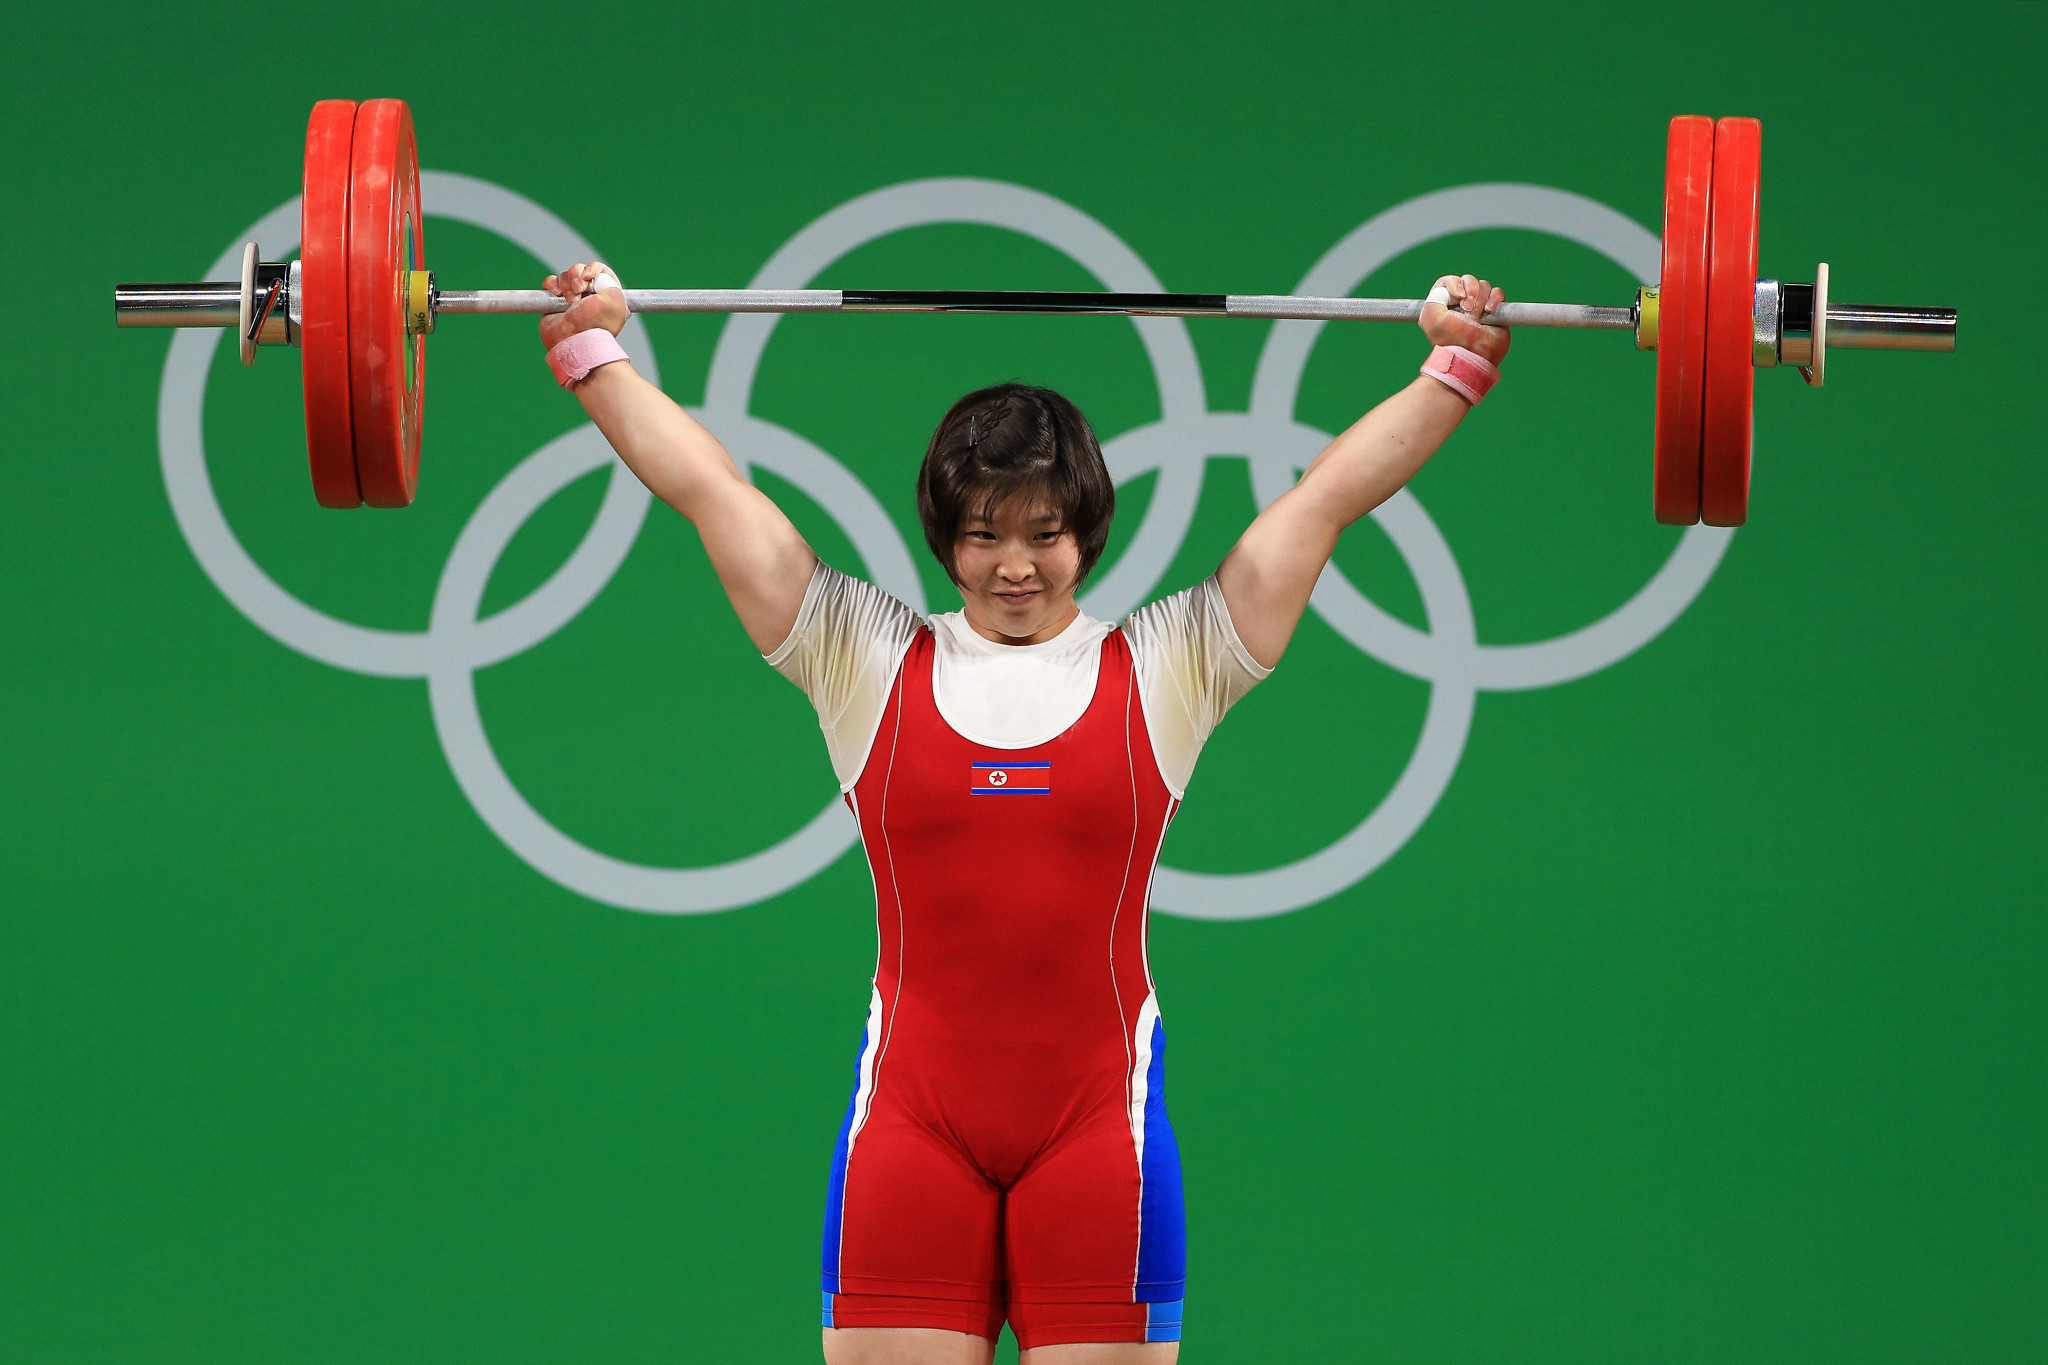 Weightlifting is North Korea's most successful Olympic sport, with Rim Jong-sim a gold medal winner at Rio 2016 ©Getty Images